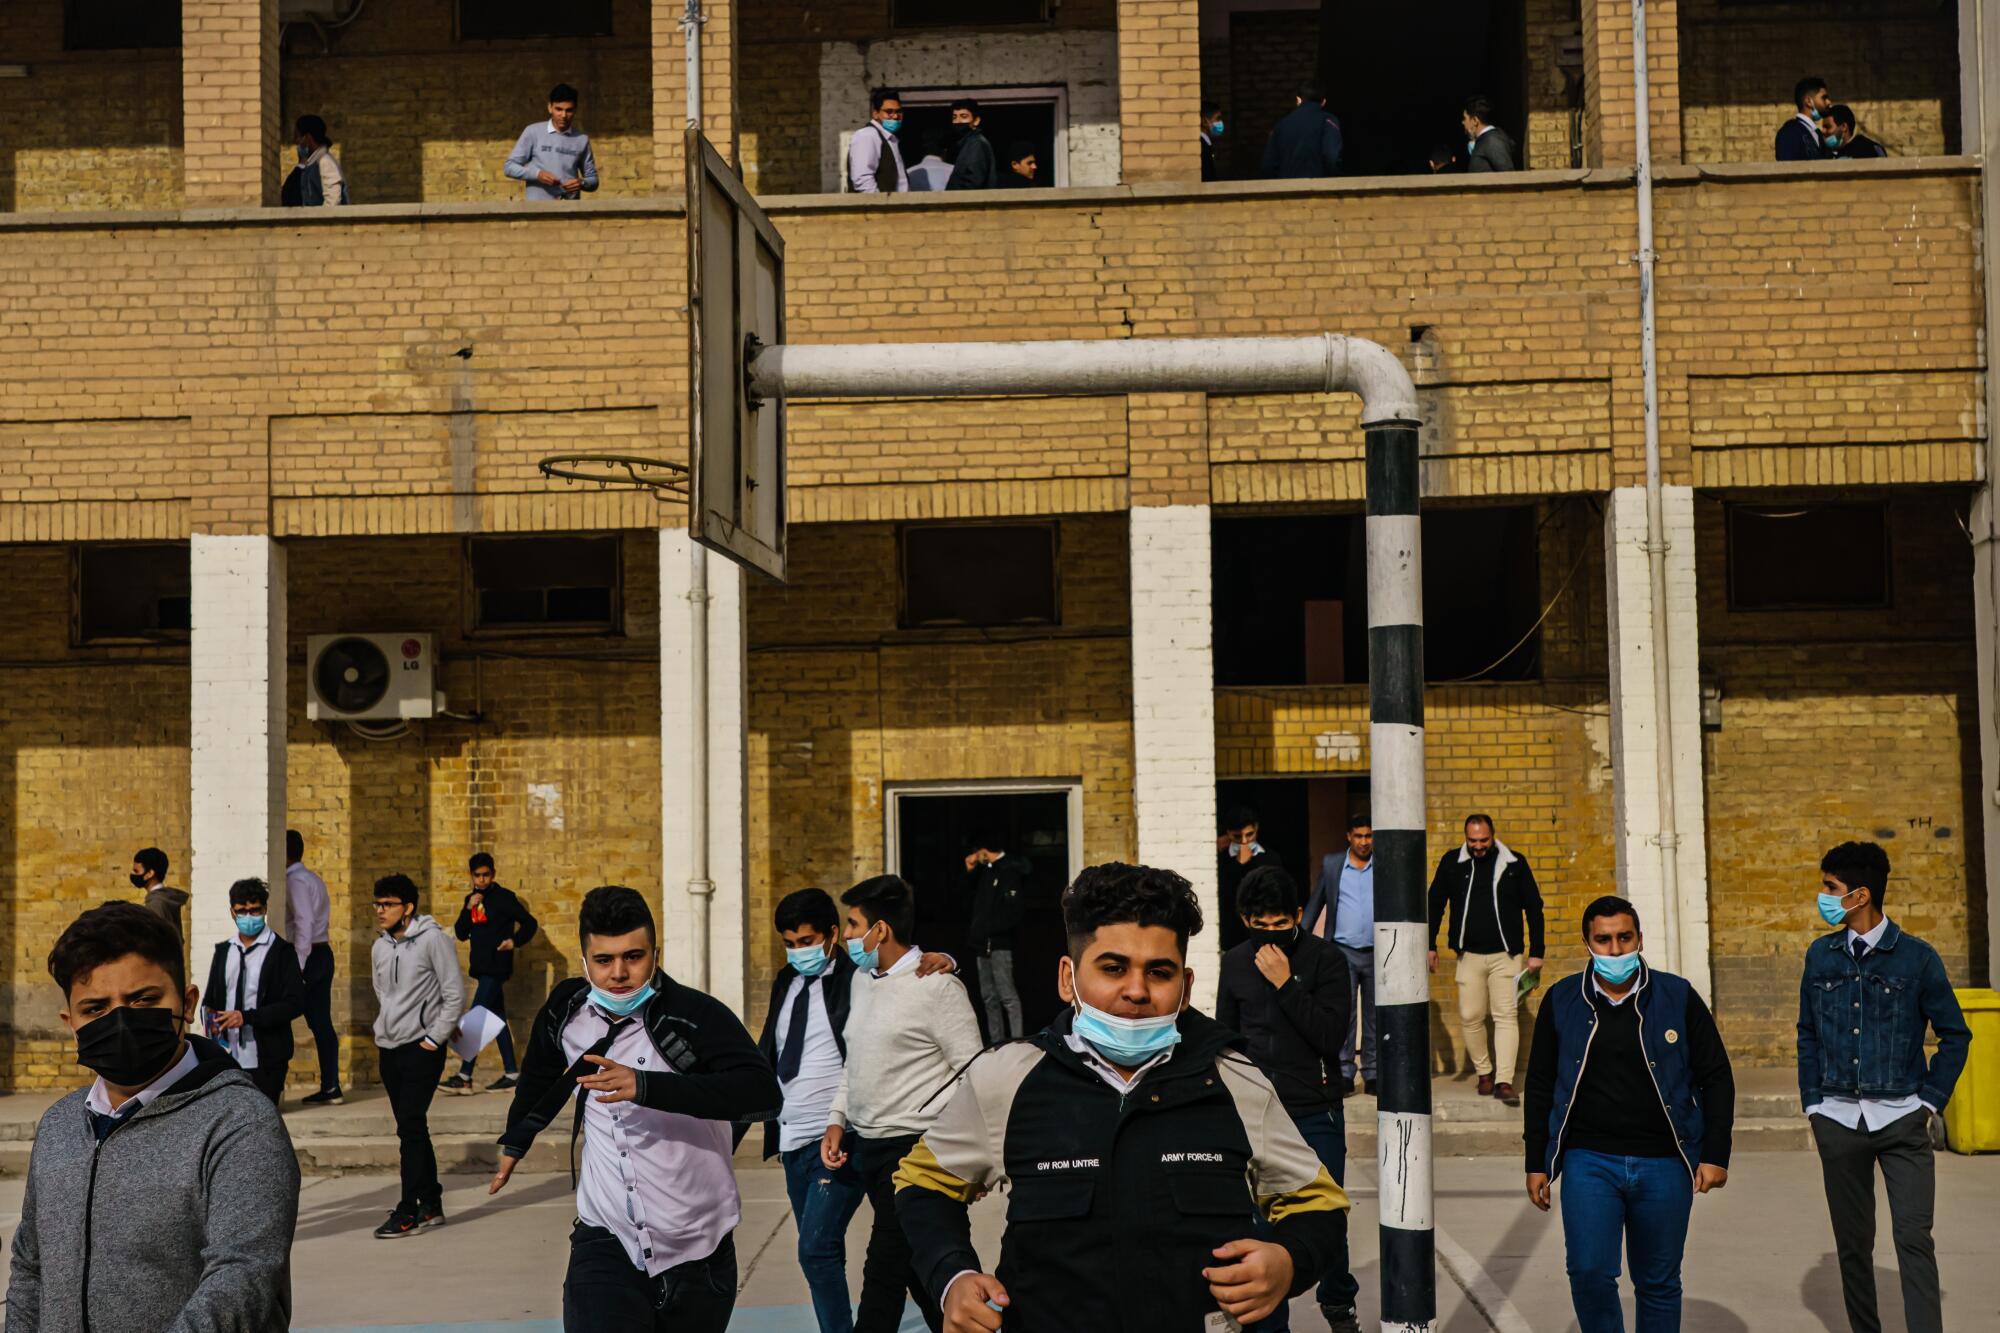 Male students, some with their masks down, gather in a school courtyard